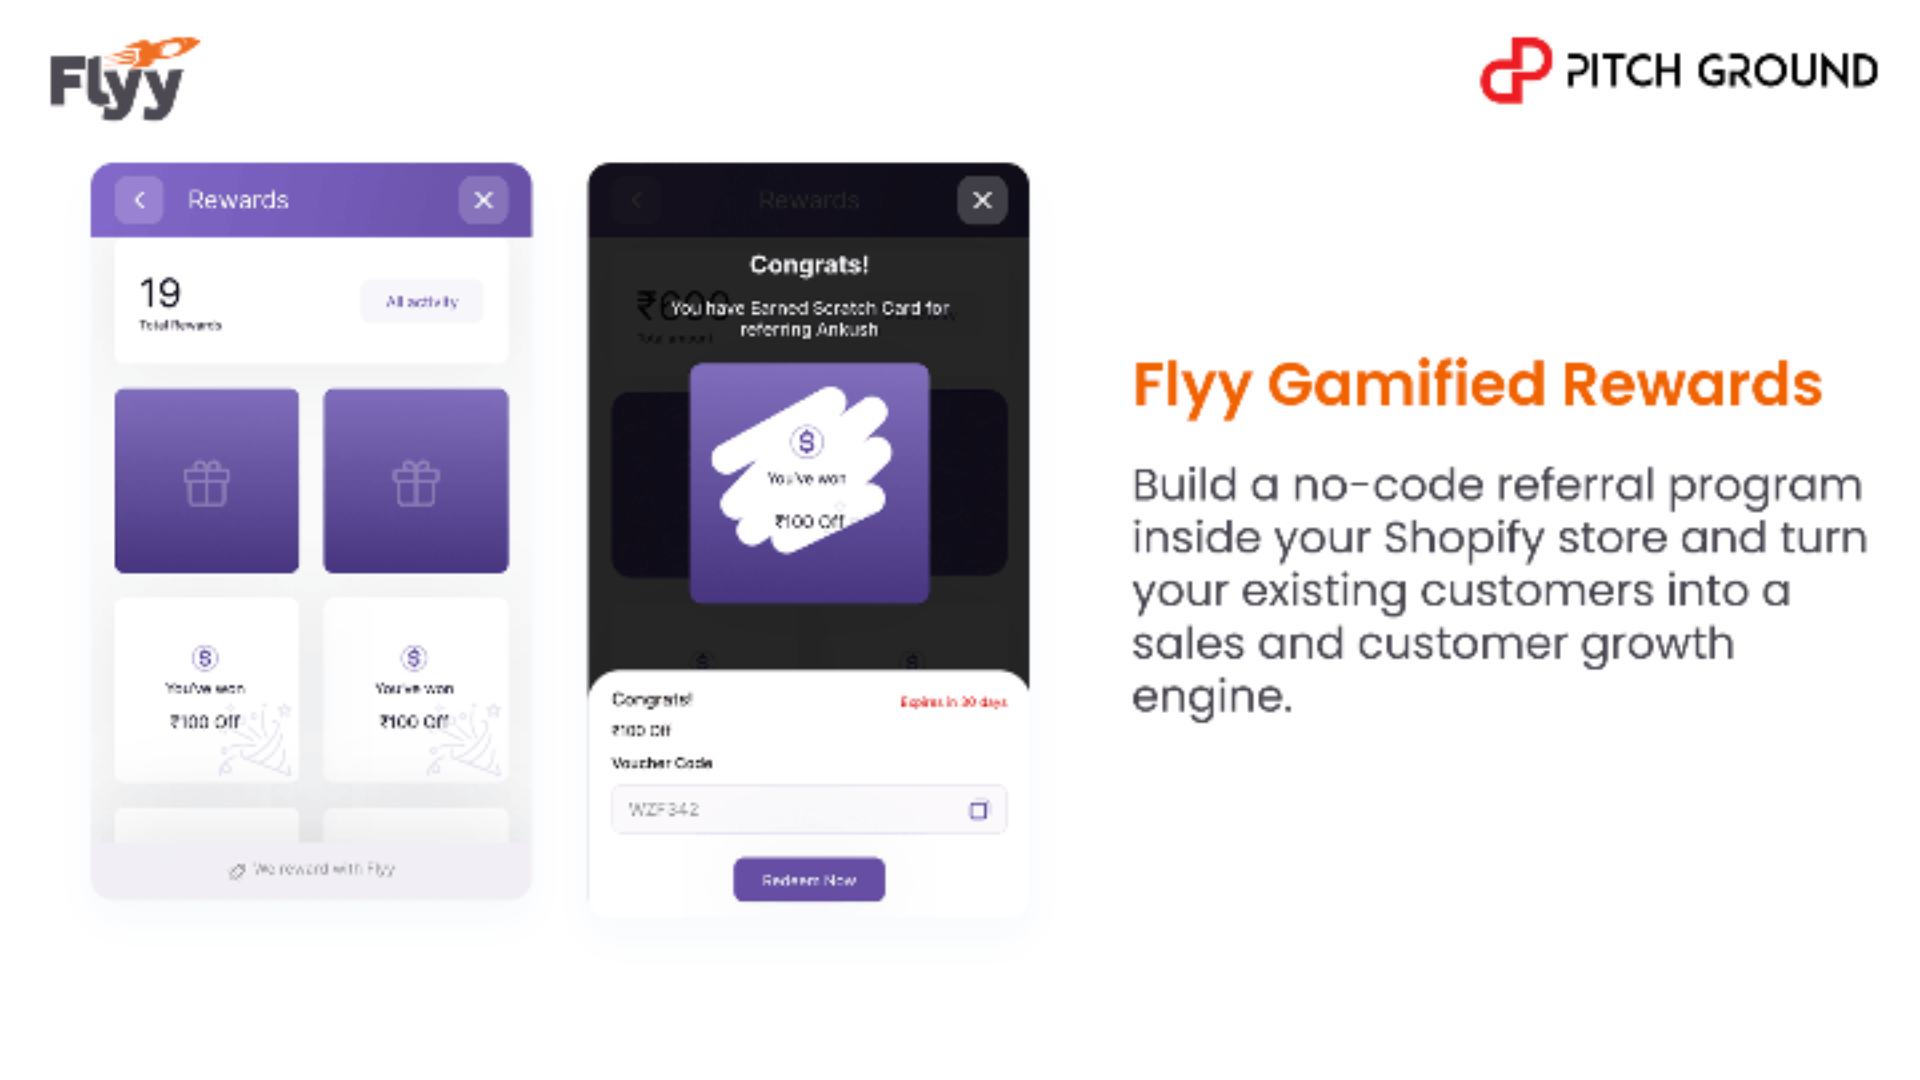 Lifetime Deal to Flyy Gamified Rewards: Acquire Starter for $29